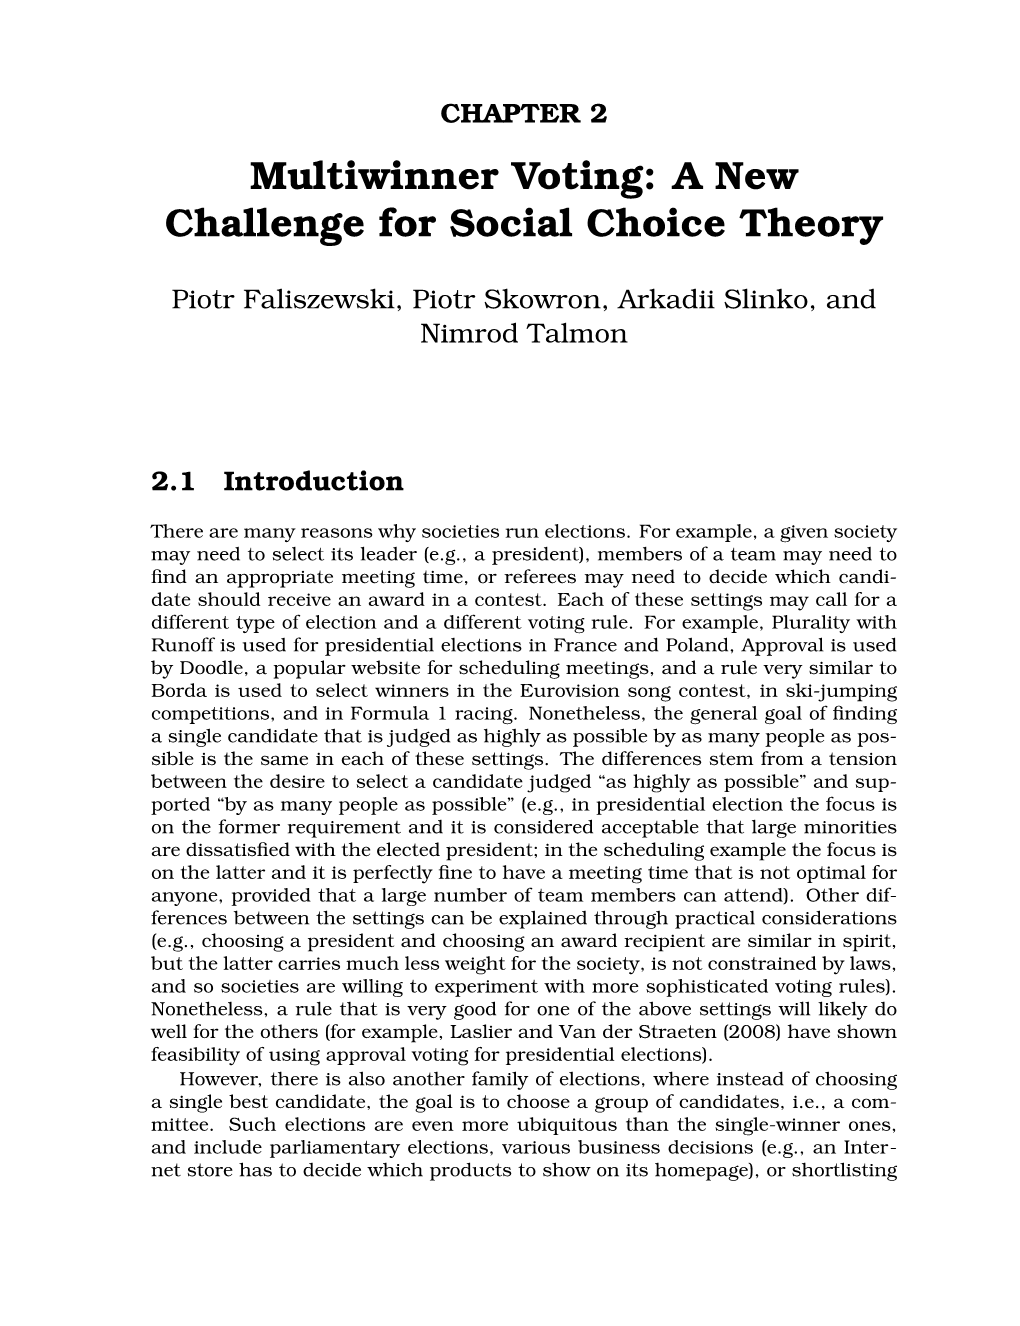 Multiwinner Voting: a New Challenge for Social Choice Theory